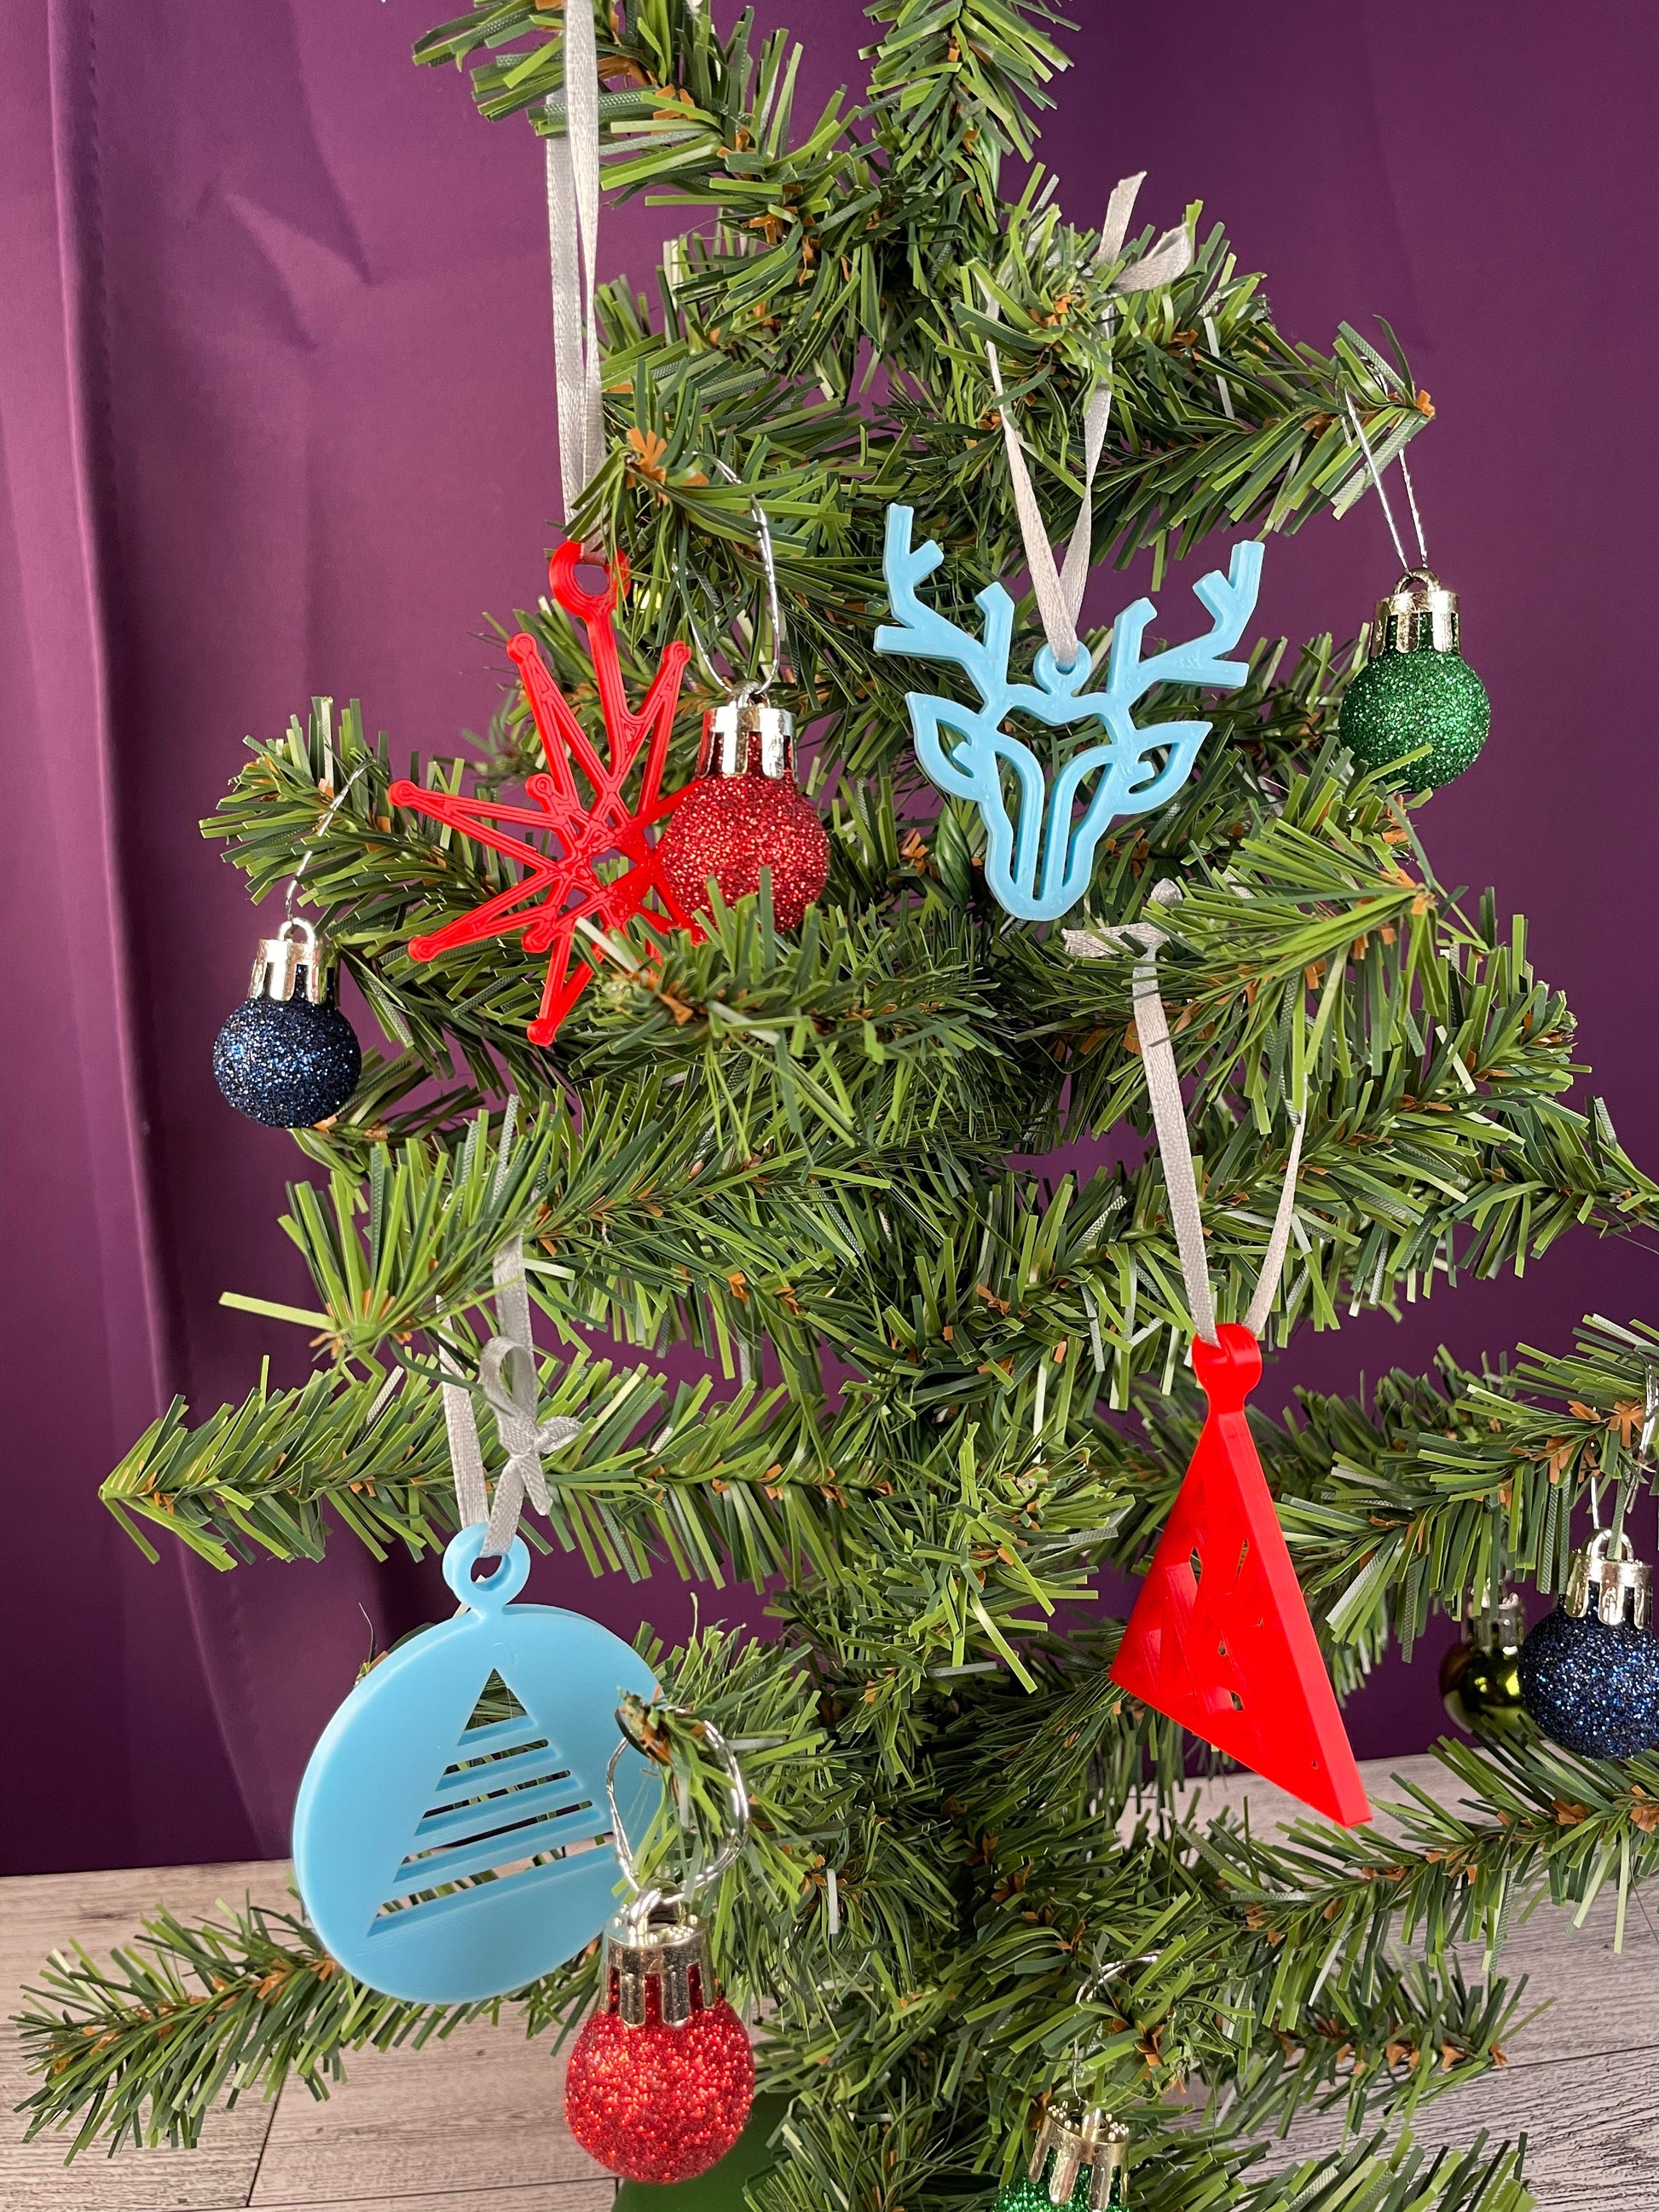 Ornaments on a christmas tree on a wood surface and a purple curtain backdrop. Six ornaments are small sparkly balls in blue, red and green. The other ornaments are a fractal star in red with a light gray ribbon. A light blue modern reindeer with a light gray ribbon. A red fractal christmas tree with a light gray ribbon. The last ornament is a light blue circle with a triangular christmas tree cut out of the circle.